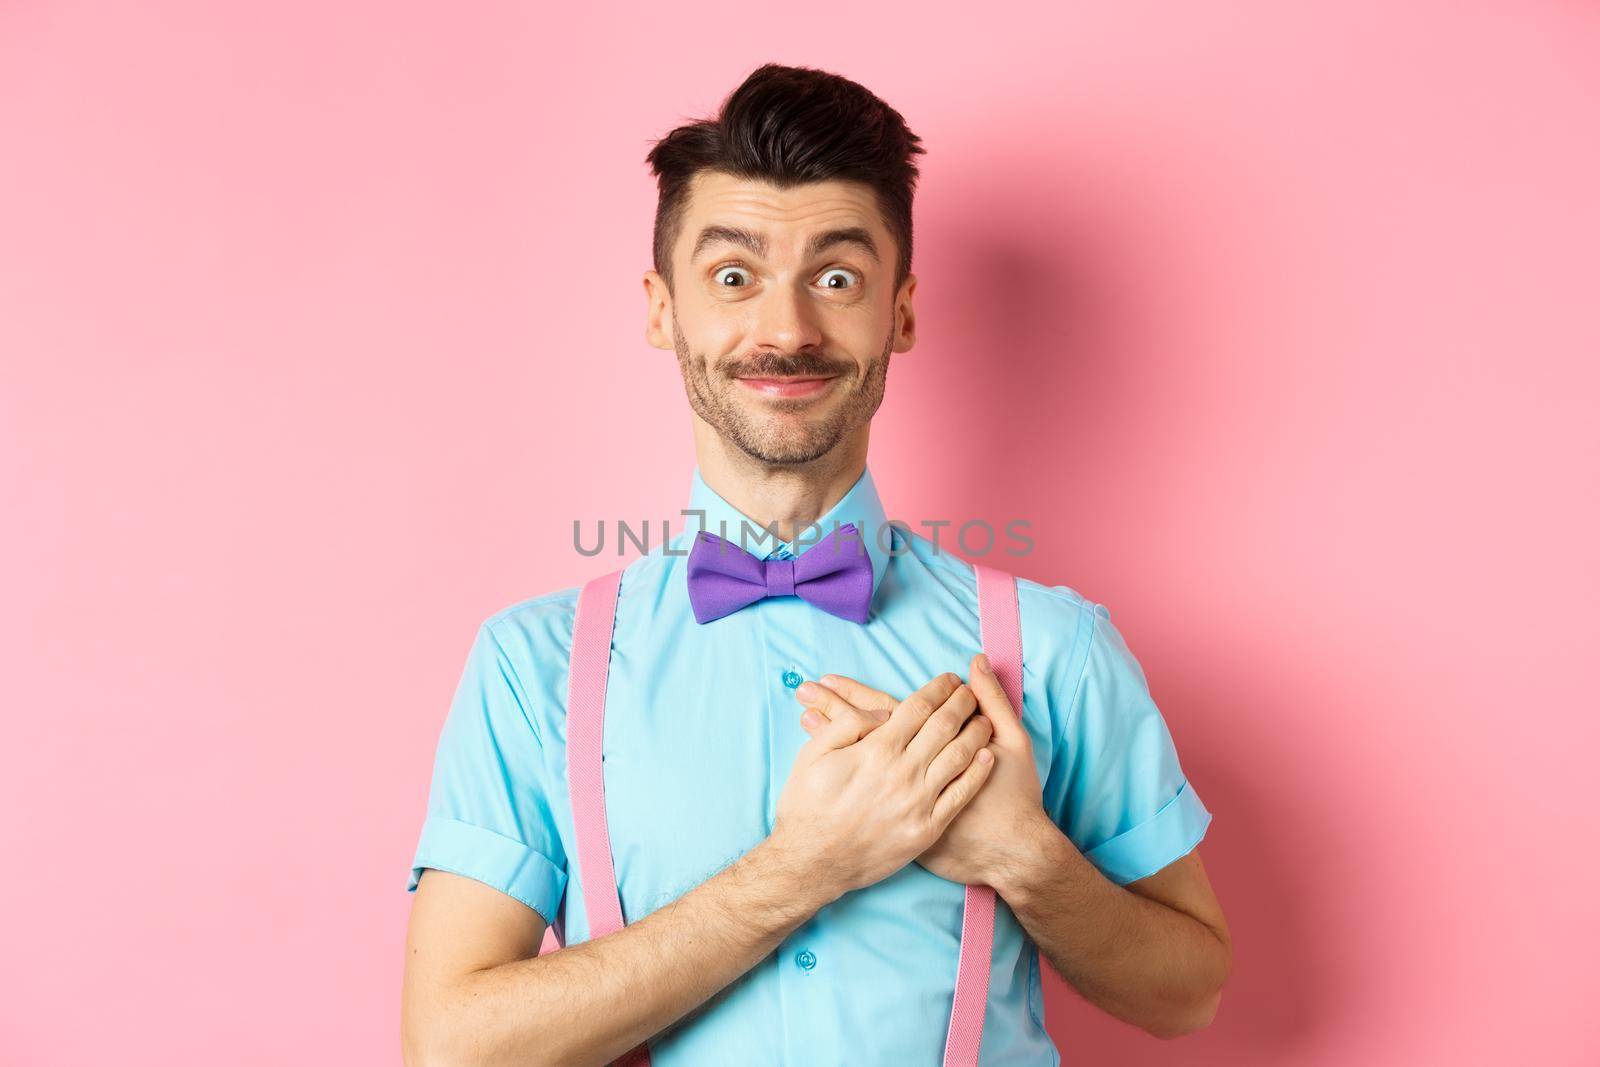 Cheerful young man with moustache, wearing shirt and bow-tie, holding hands on heart and smiling grateful, saying thank you, standing on pink background.